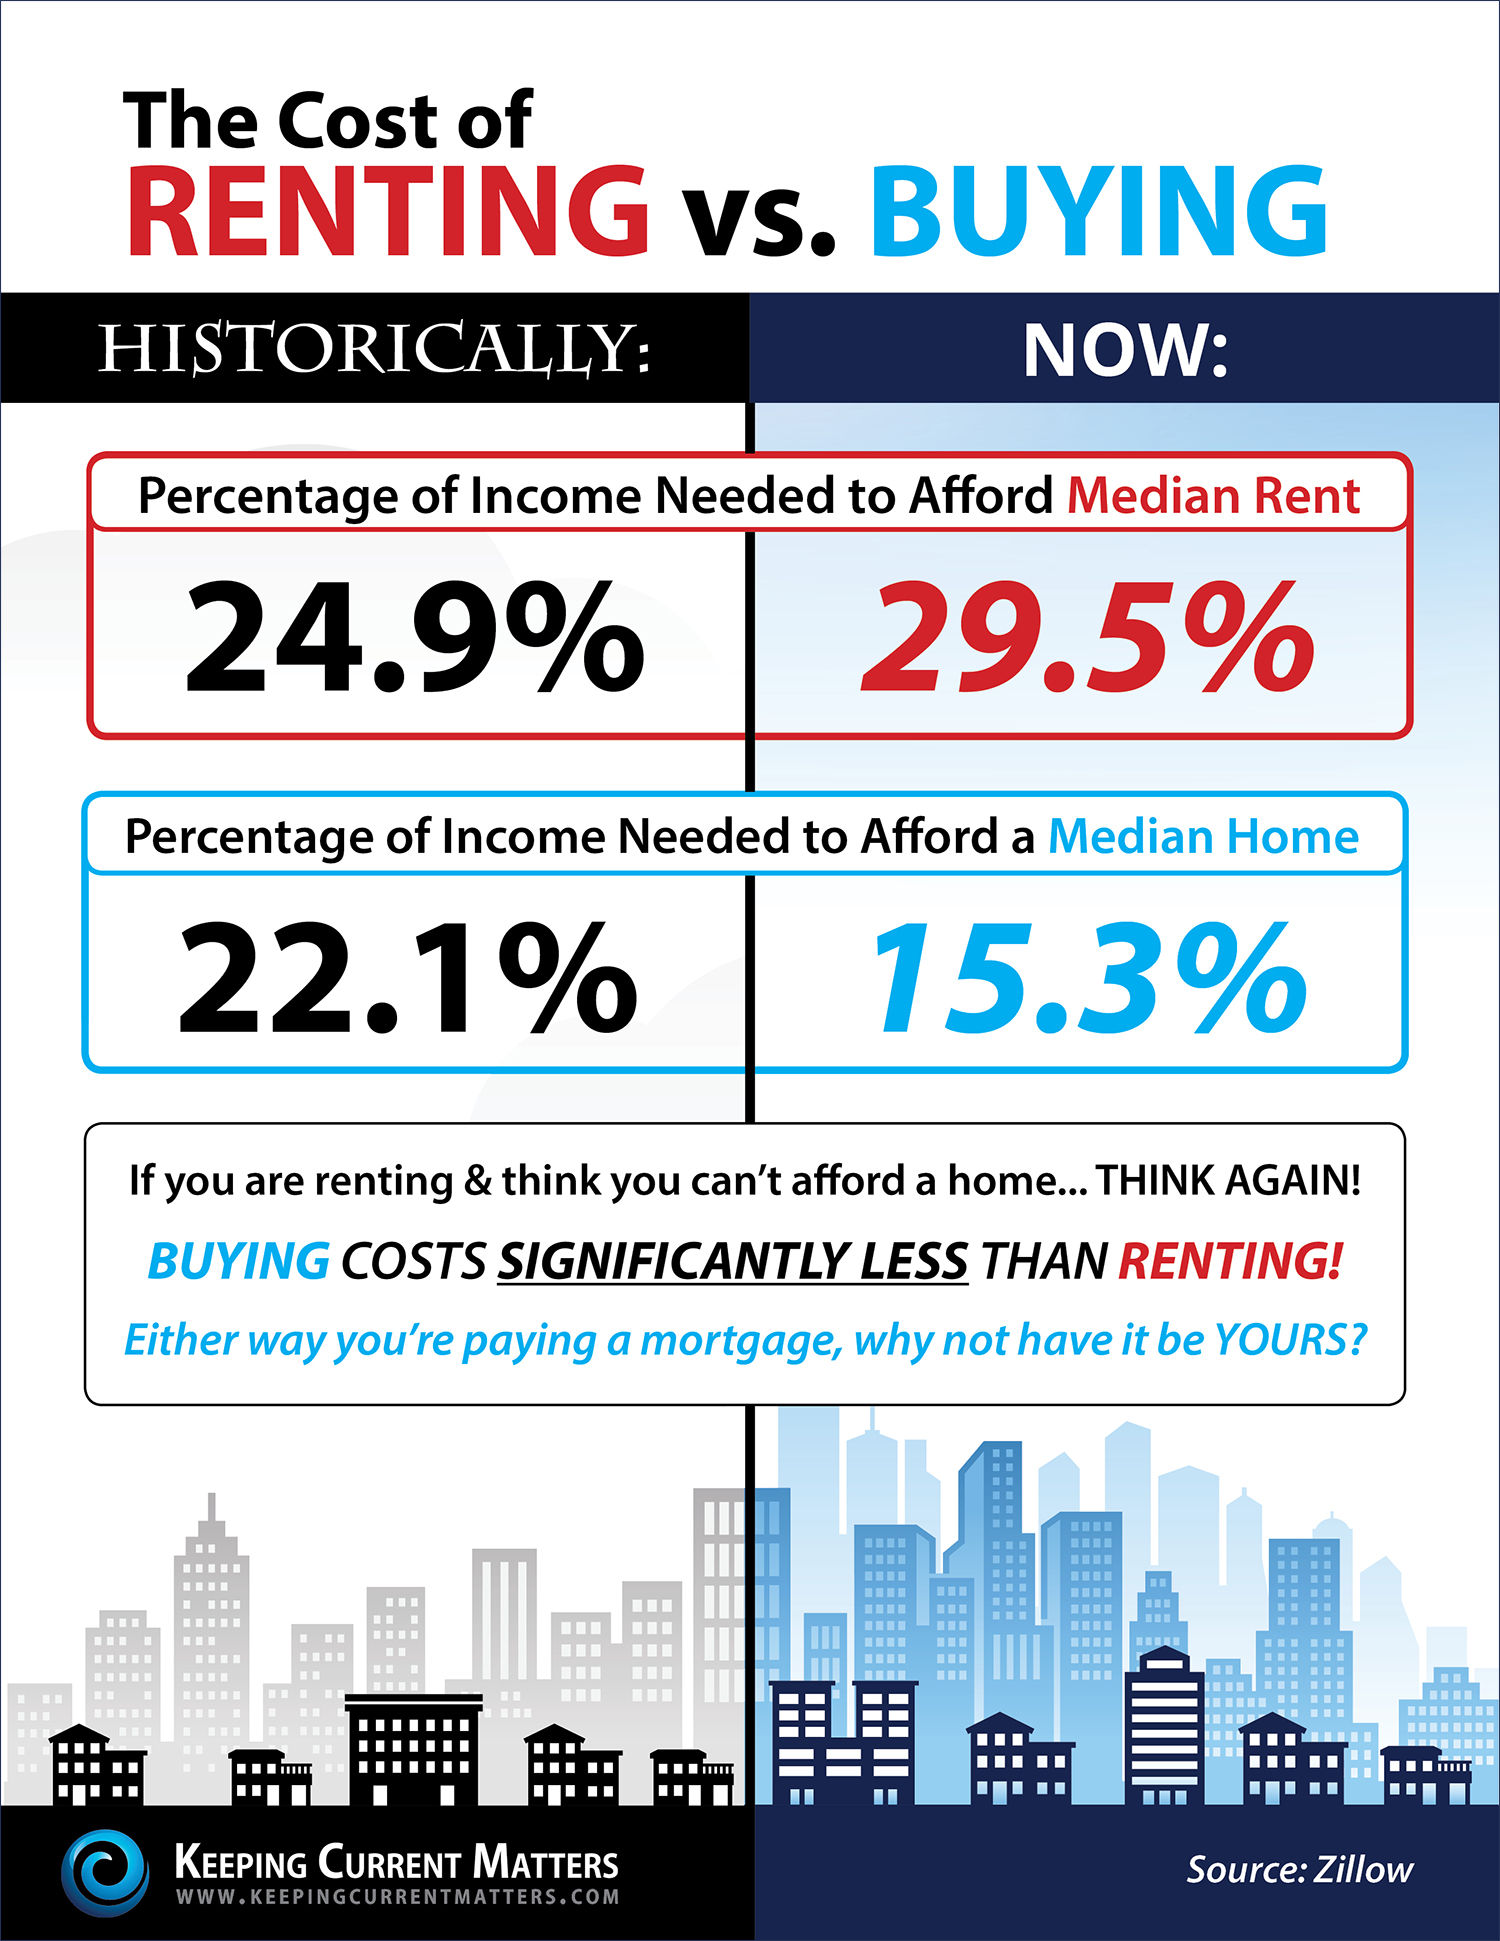 FTHB Charleston SC: Why Buying Is Better Than Renting